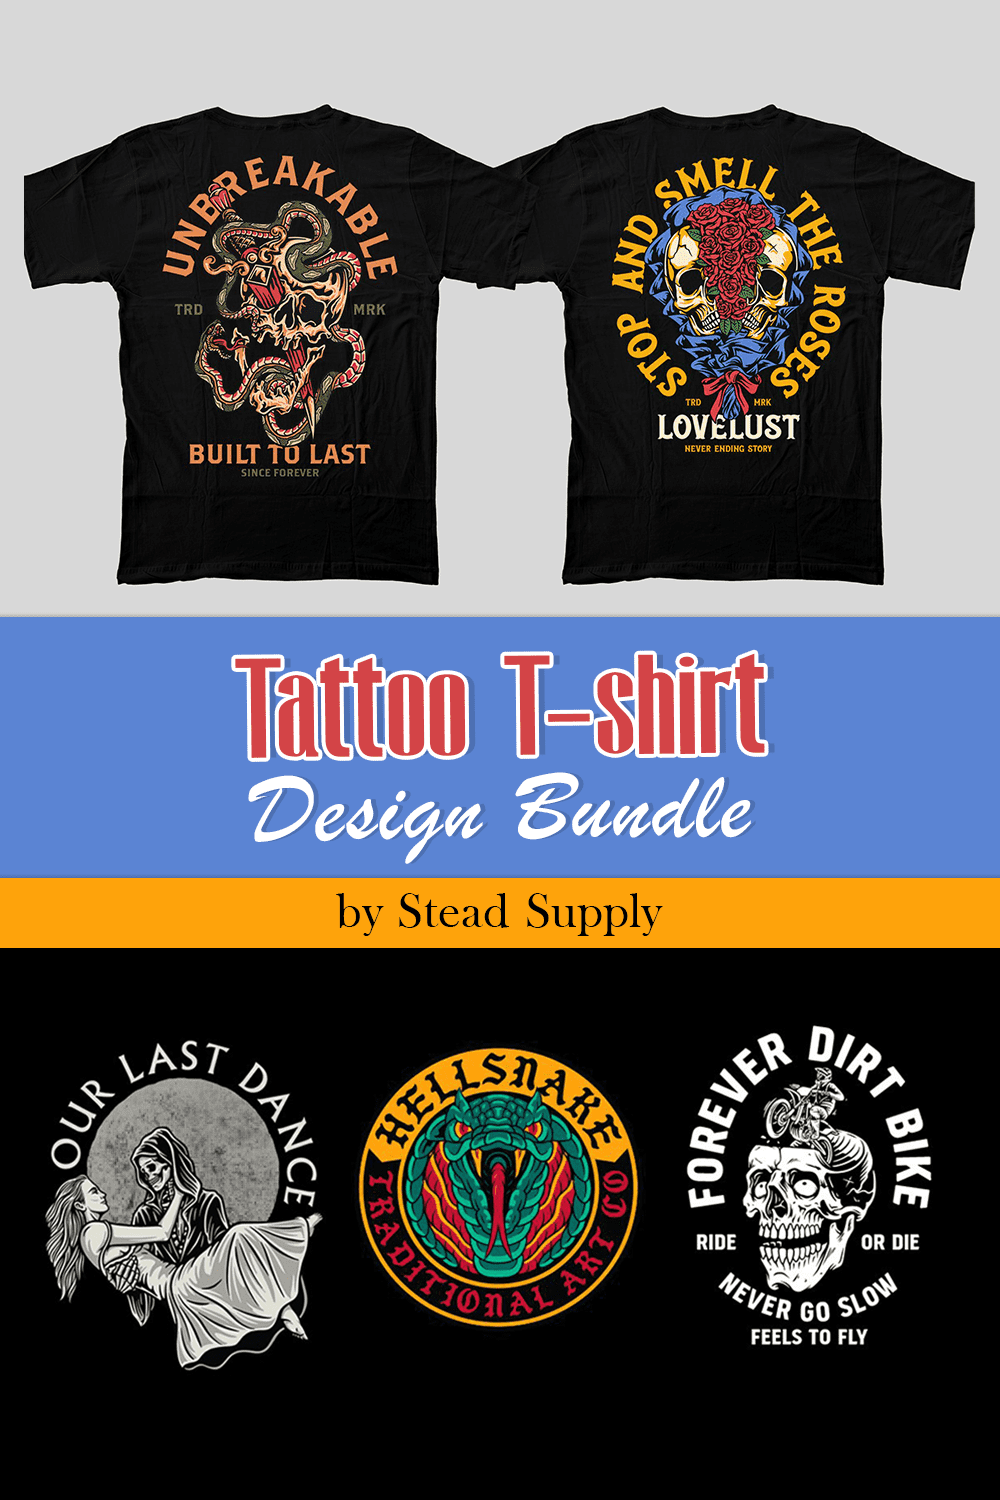 A pack of black t-shirts with a bright print of a skull with roses and a skull with a dagger.